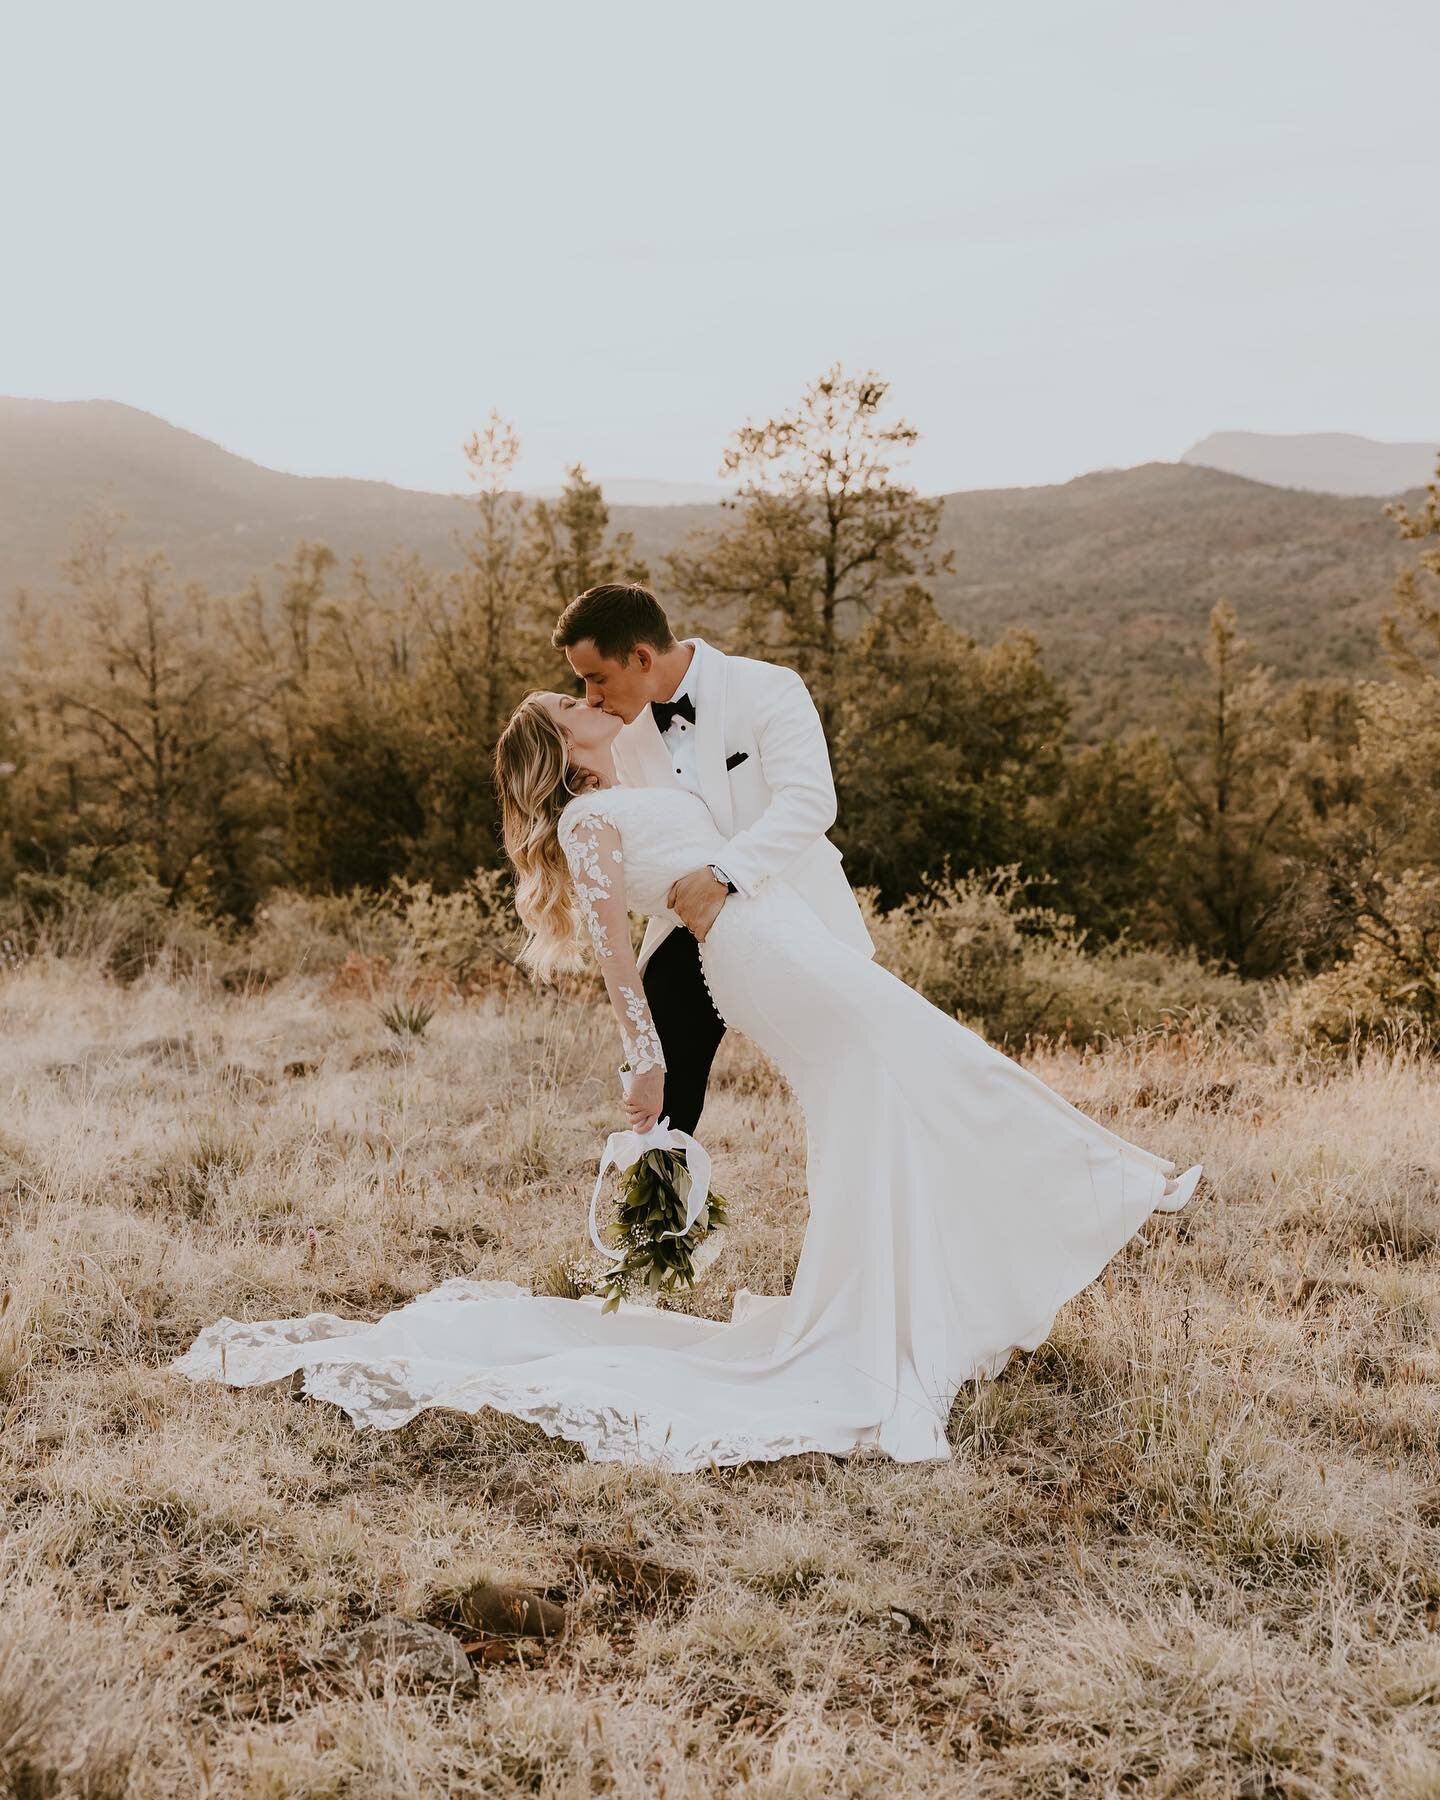 It&rsquo;s wedding week for my favorite couple ever!!🤍🤍
Had the most stunning bridal session with them this past weekend in Sedona and couldn&rsquo;t wait any longer to share!